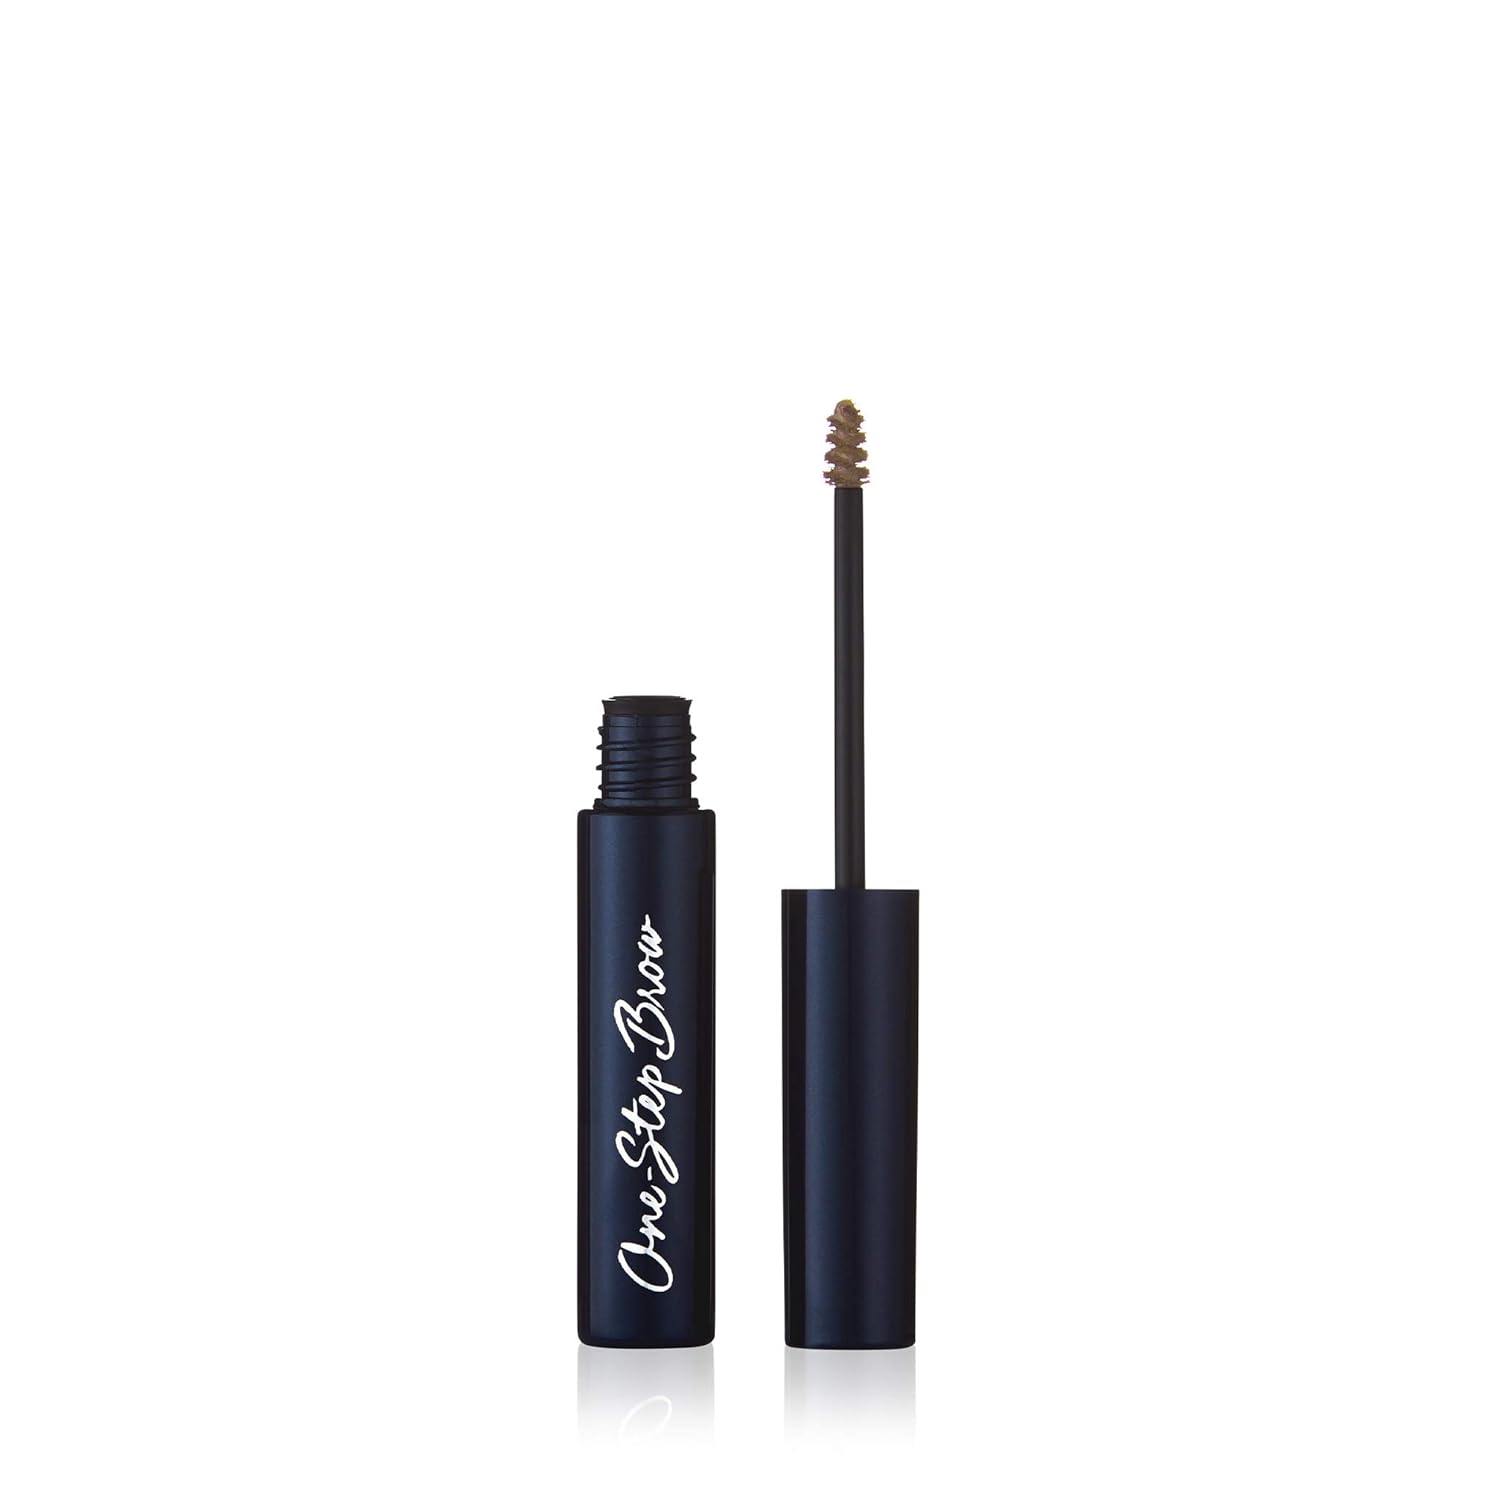 Lune+Aster One-Step Brow - Blonde - Tinted eyebrow gel fills, tames and shapes